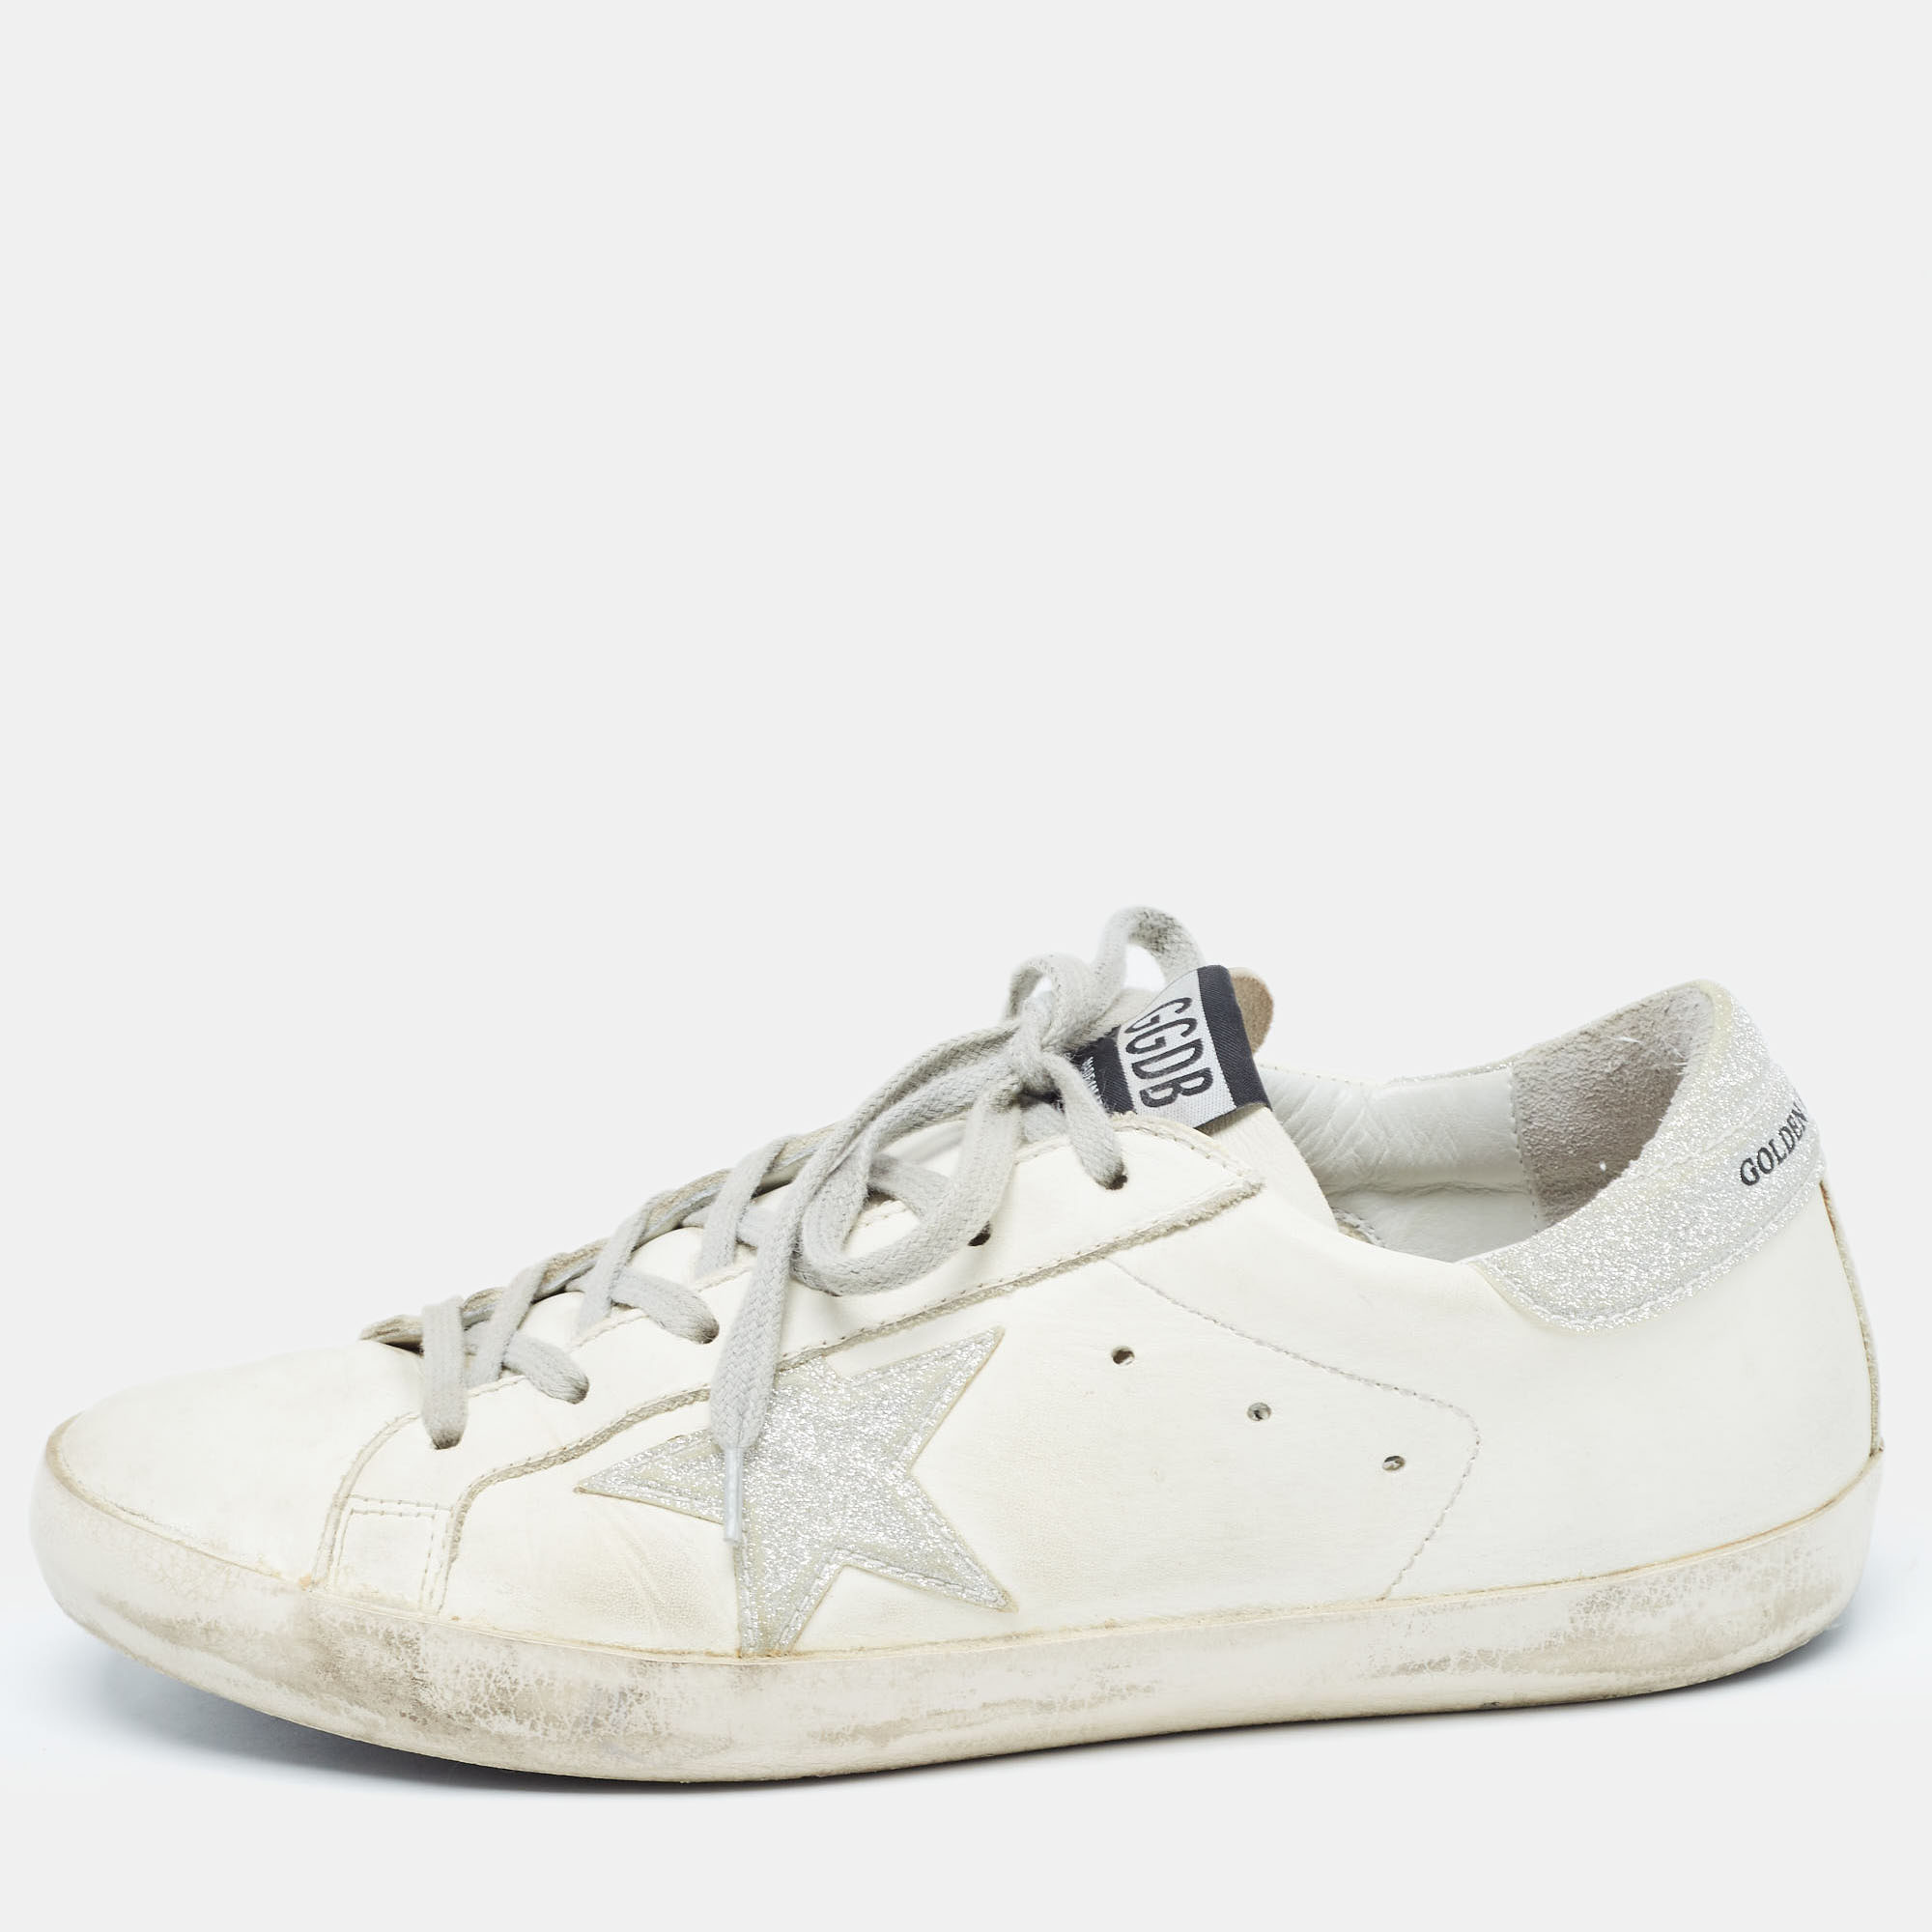 Golden Goose White/Silver Glitter And Leather Superstar Sneakers Size 39